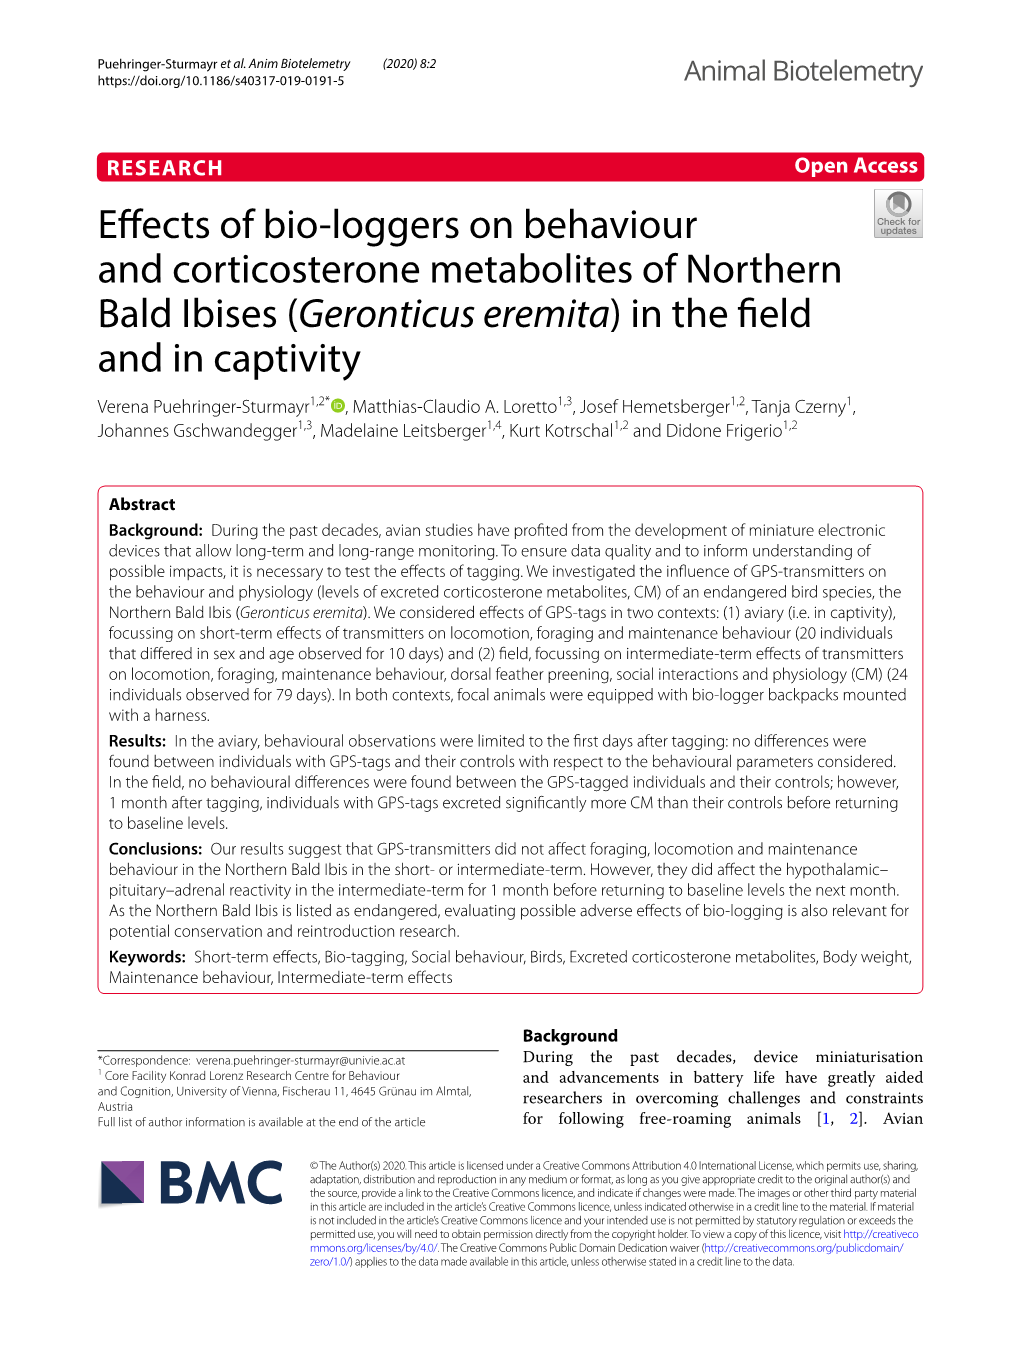 Effects of Bio-Loggers on Behaviour and Corticosterone Metabolites Of